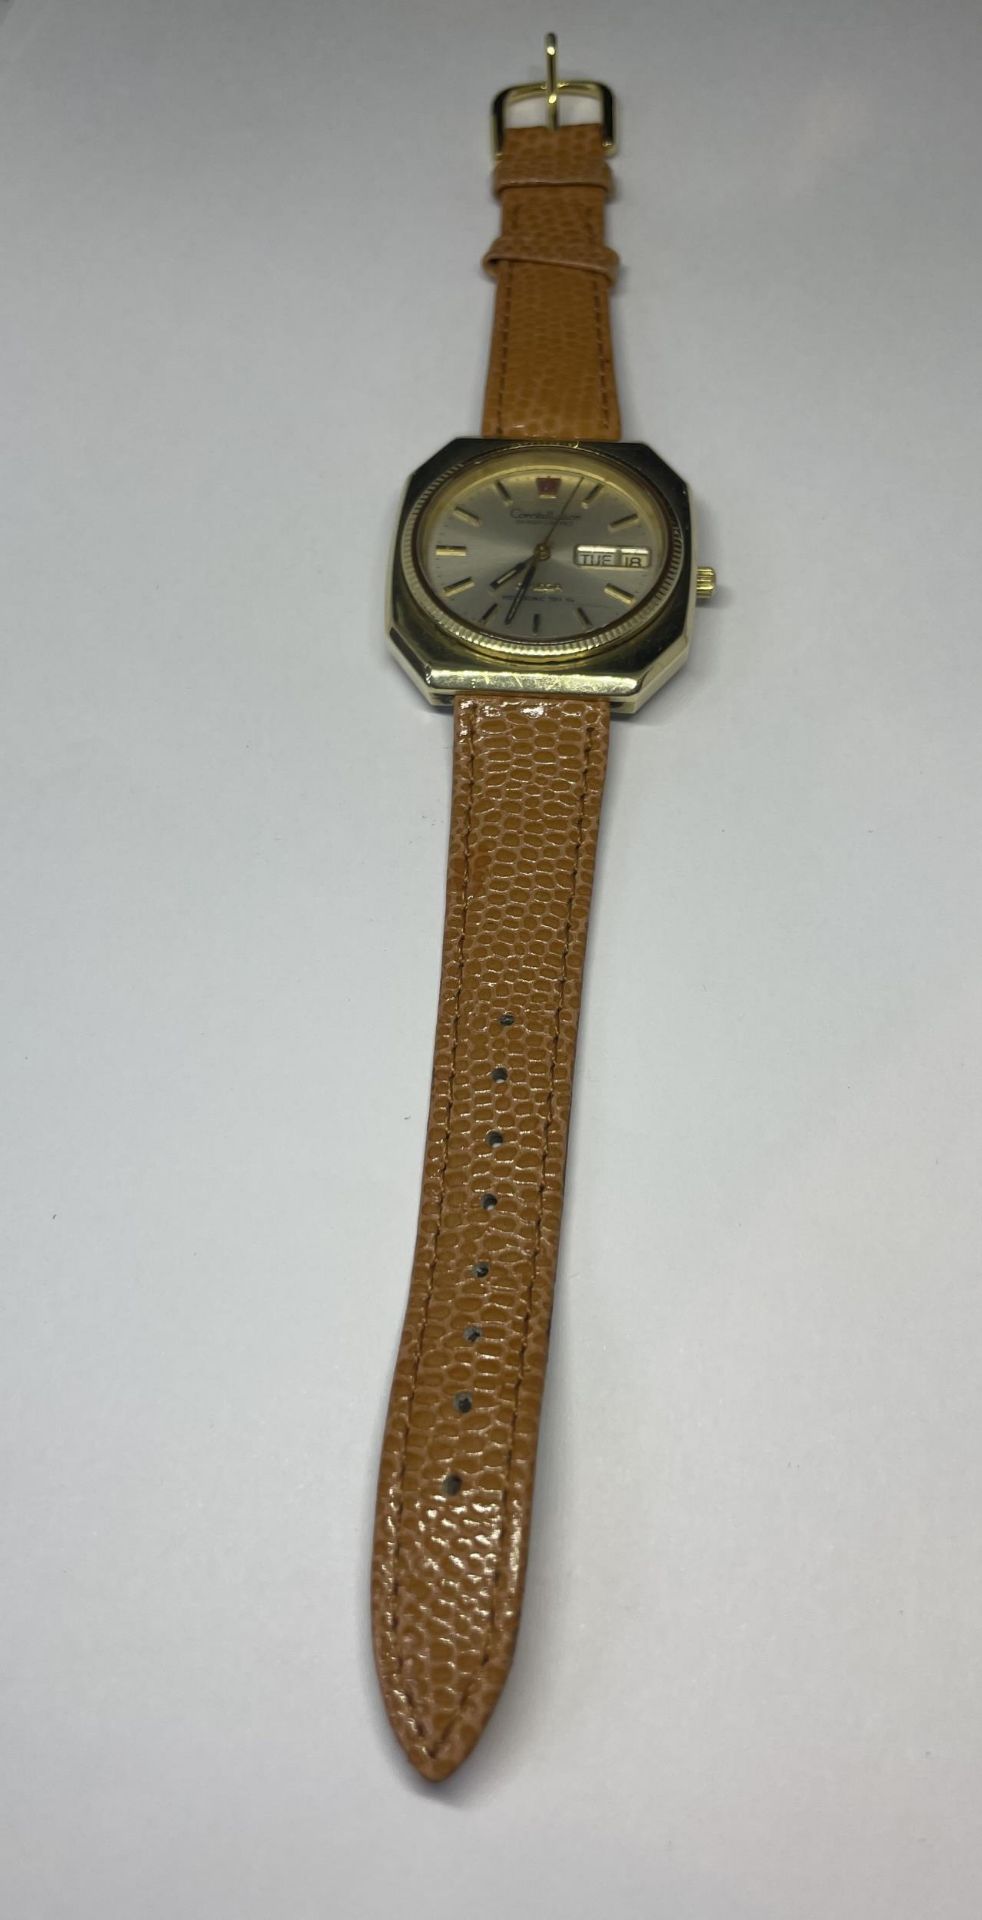 A VINTAGE OMEGA CONSTELLATION GENTS ELECTRONIC WRIST WATCH SEEN WORKING BUT NO WARRANTY - Image 2 of 4